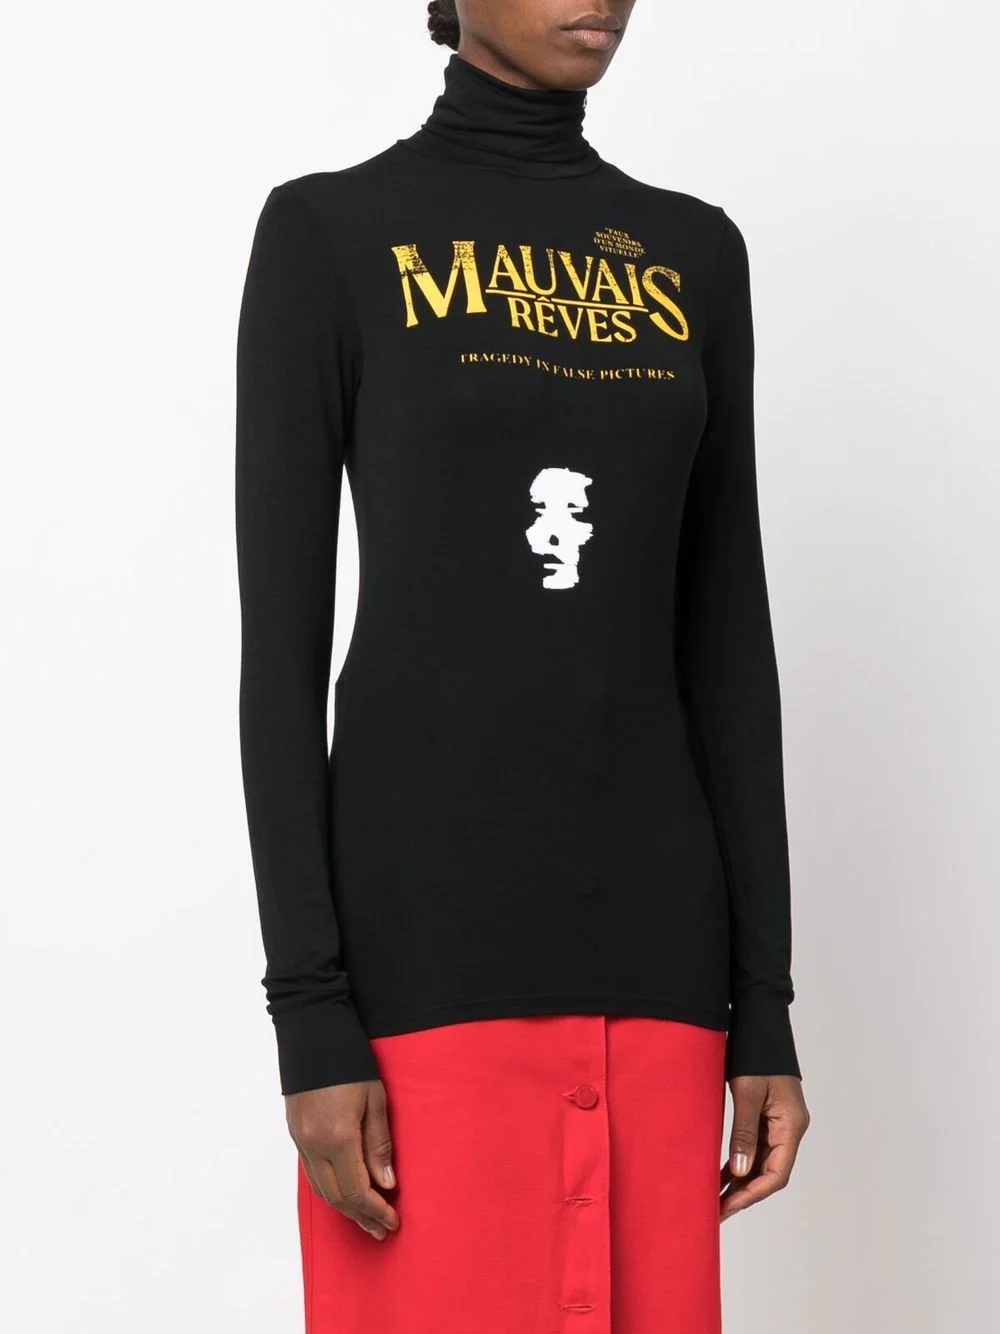 Mauvais Reves roll-neck jersey - 3